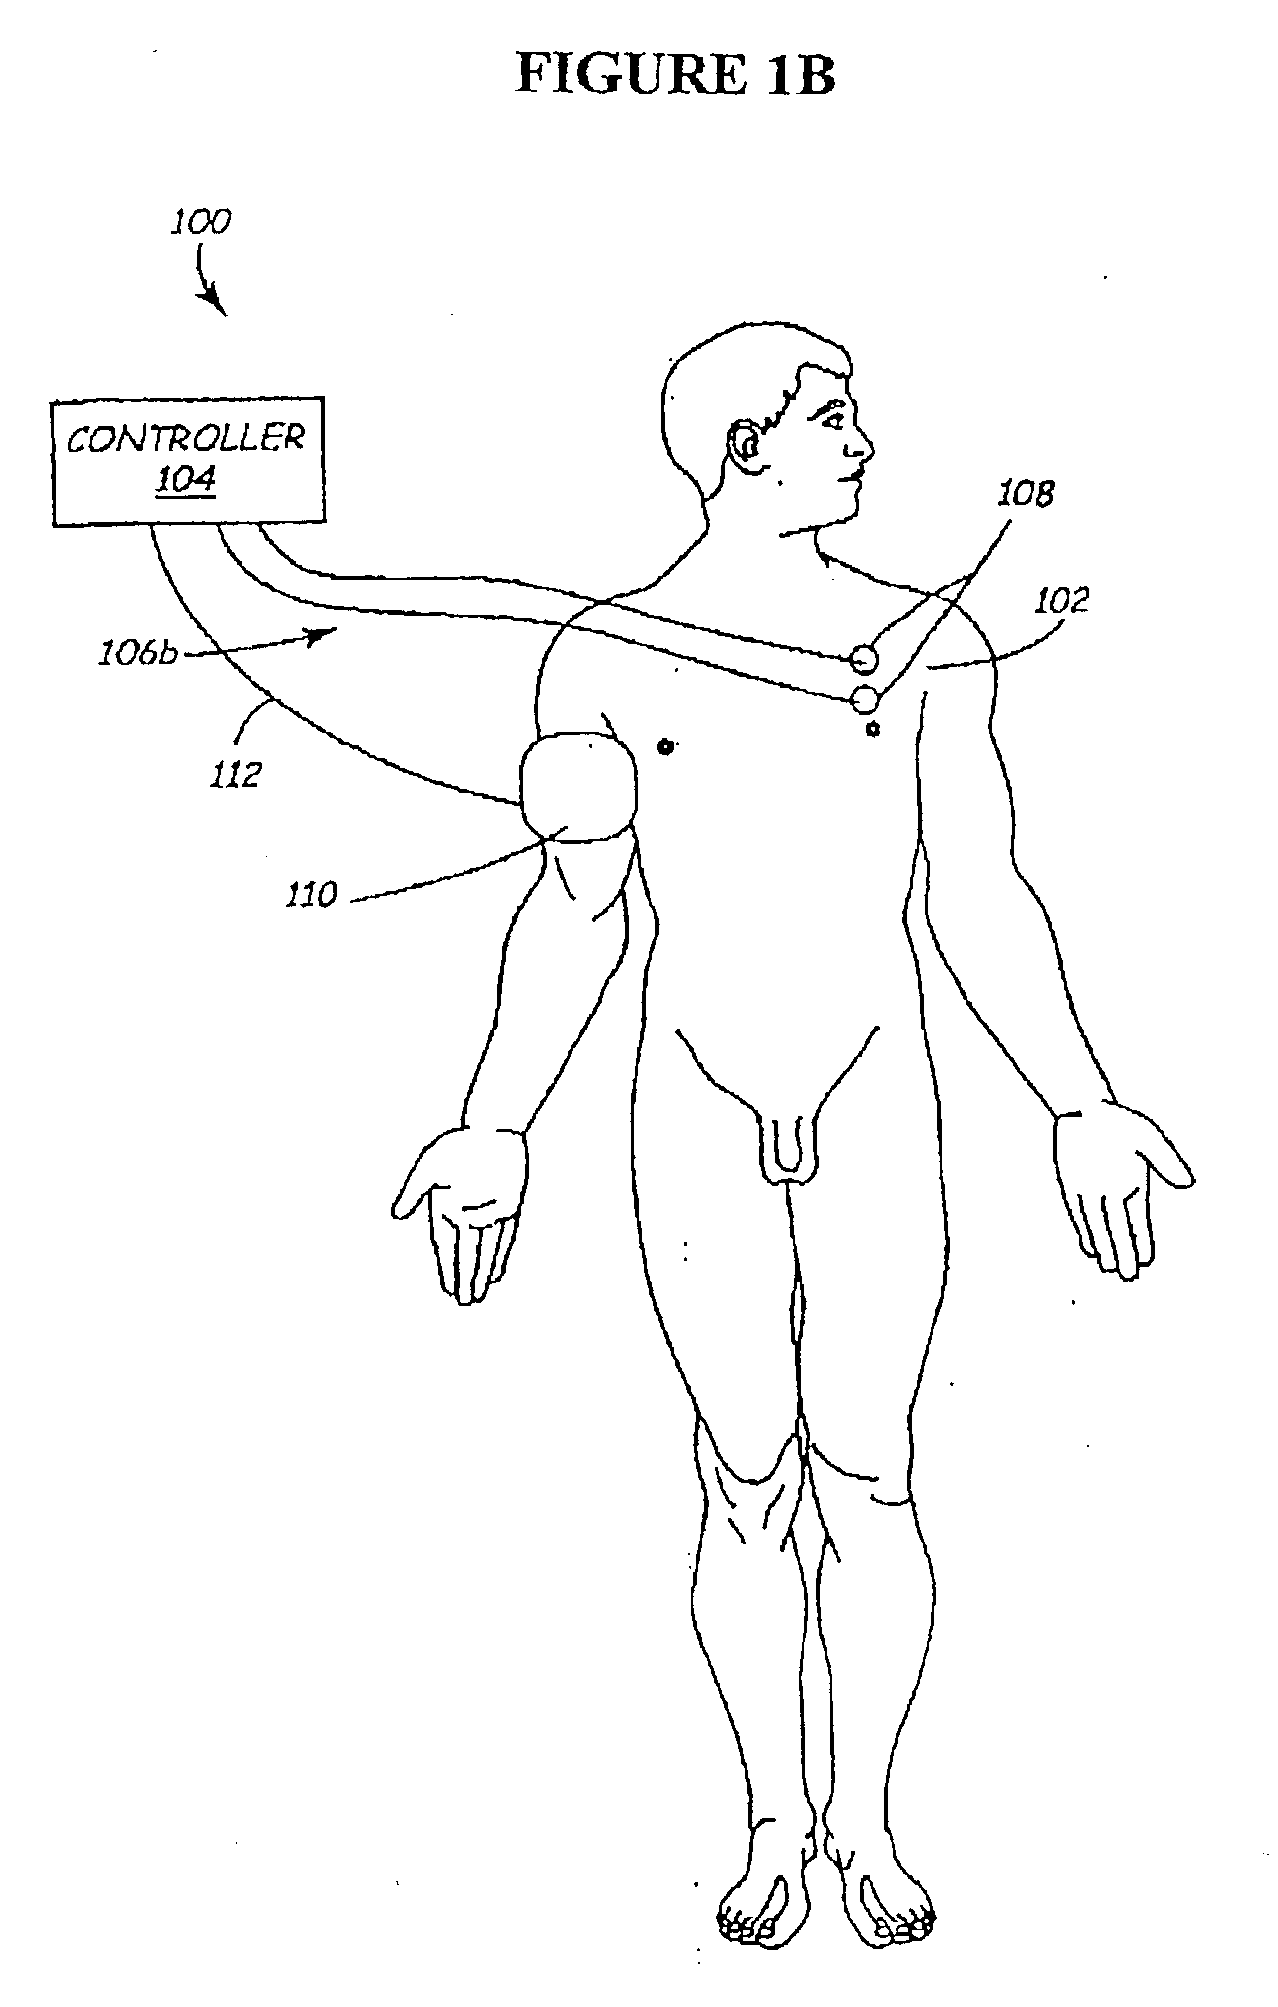 Methods and apparatus for the regulation of hormone release